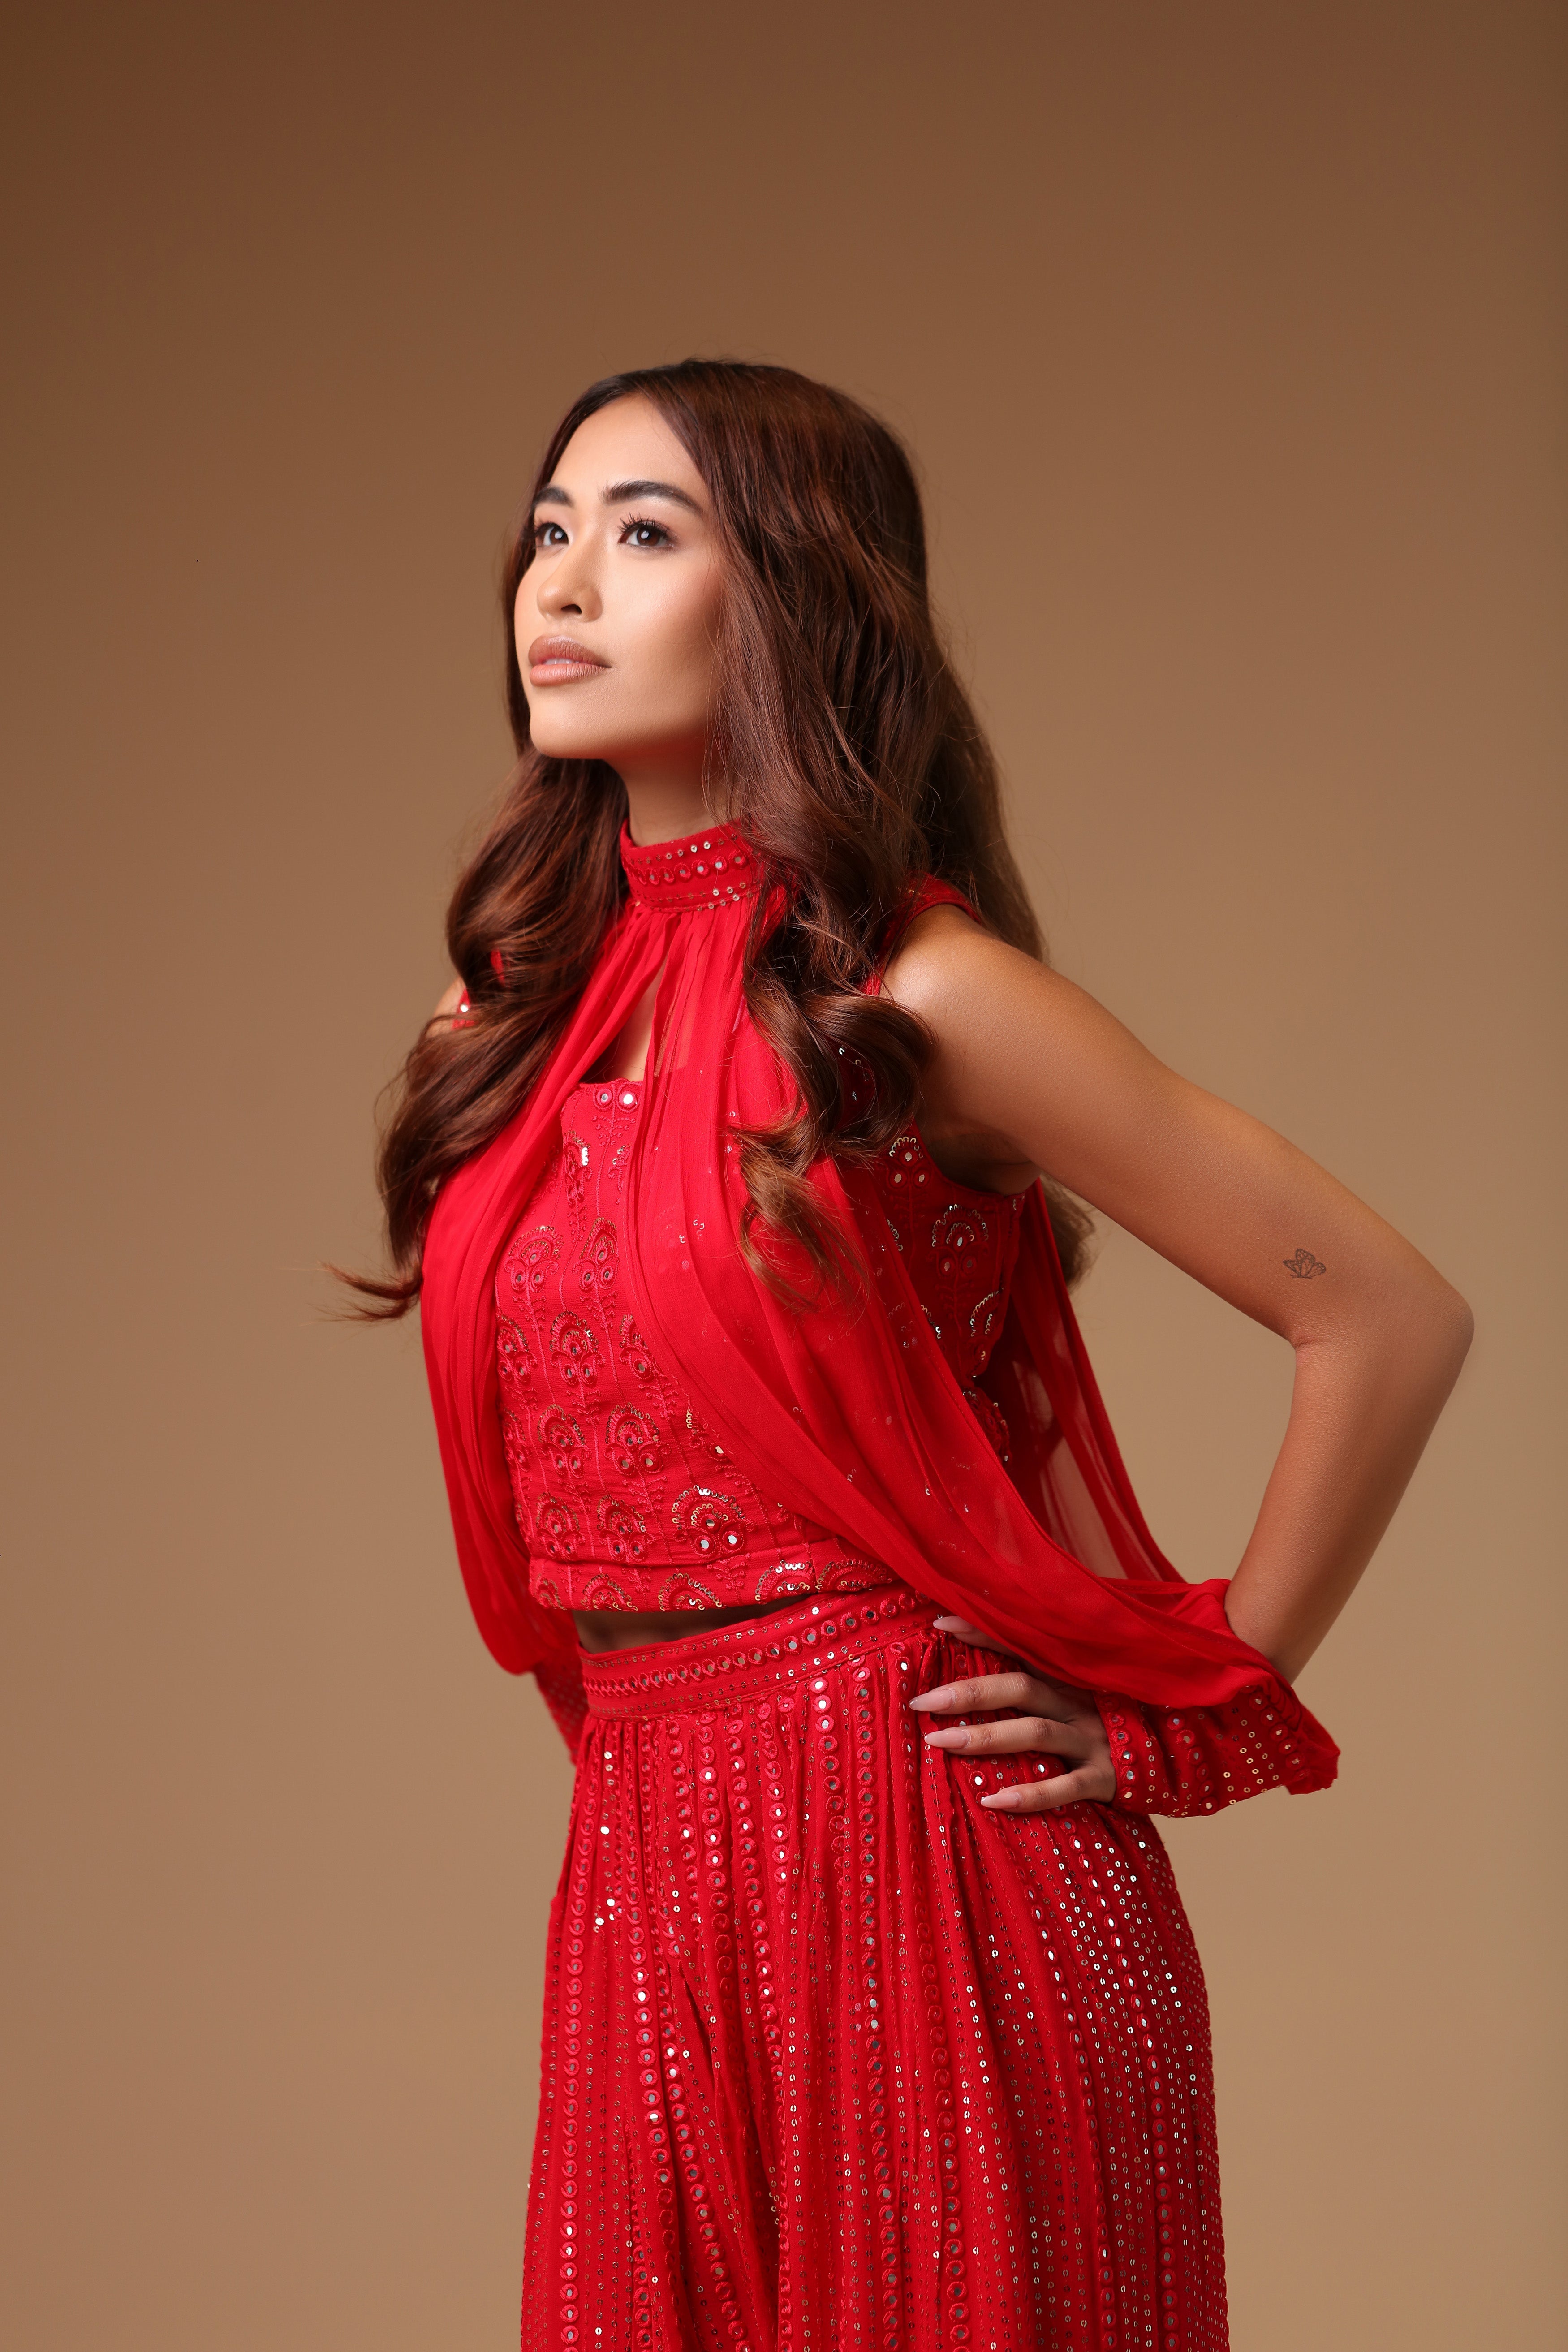 Sultry Ensemble Featuring A Red Sharara With Crop Top And Slit Sleeves